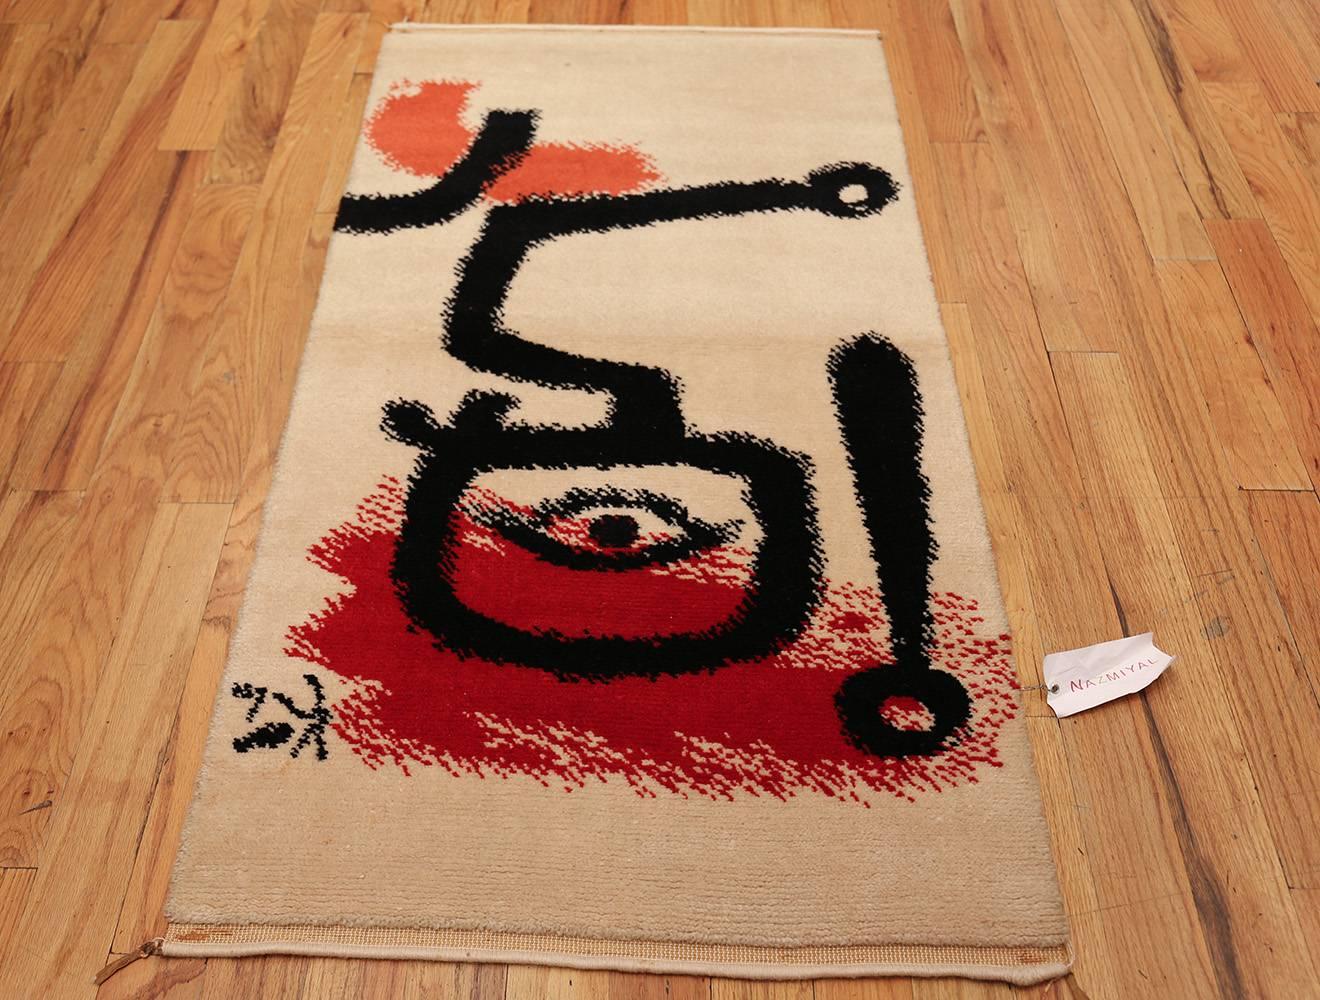 This brilliant vintage French art carpet depicts a stunning re-creation of a cutting-edge Paul Klee work known as ‘Der Paukenspieler,’ which is bold and expressive.

Vintage Continental rug inspired by Paul Klee’s “Little Drummer Boy” origin: USA,